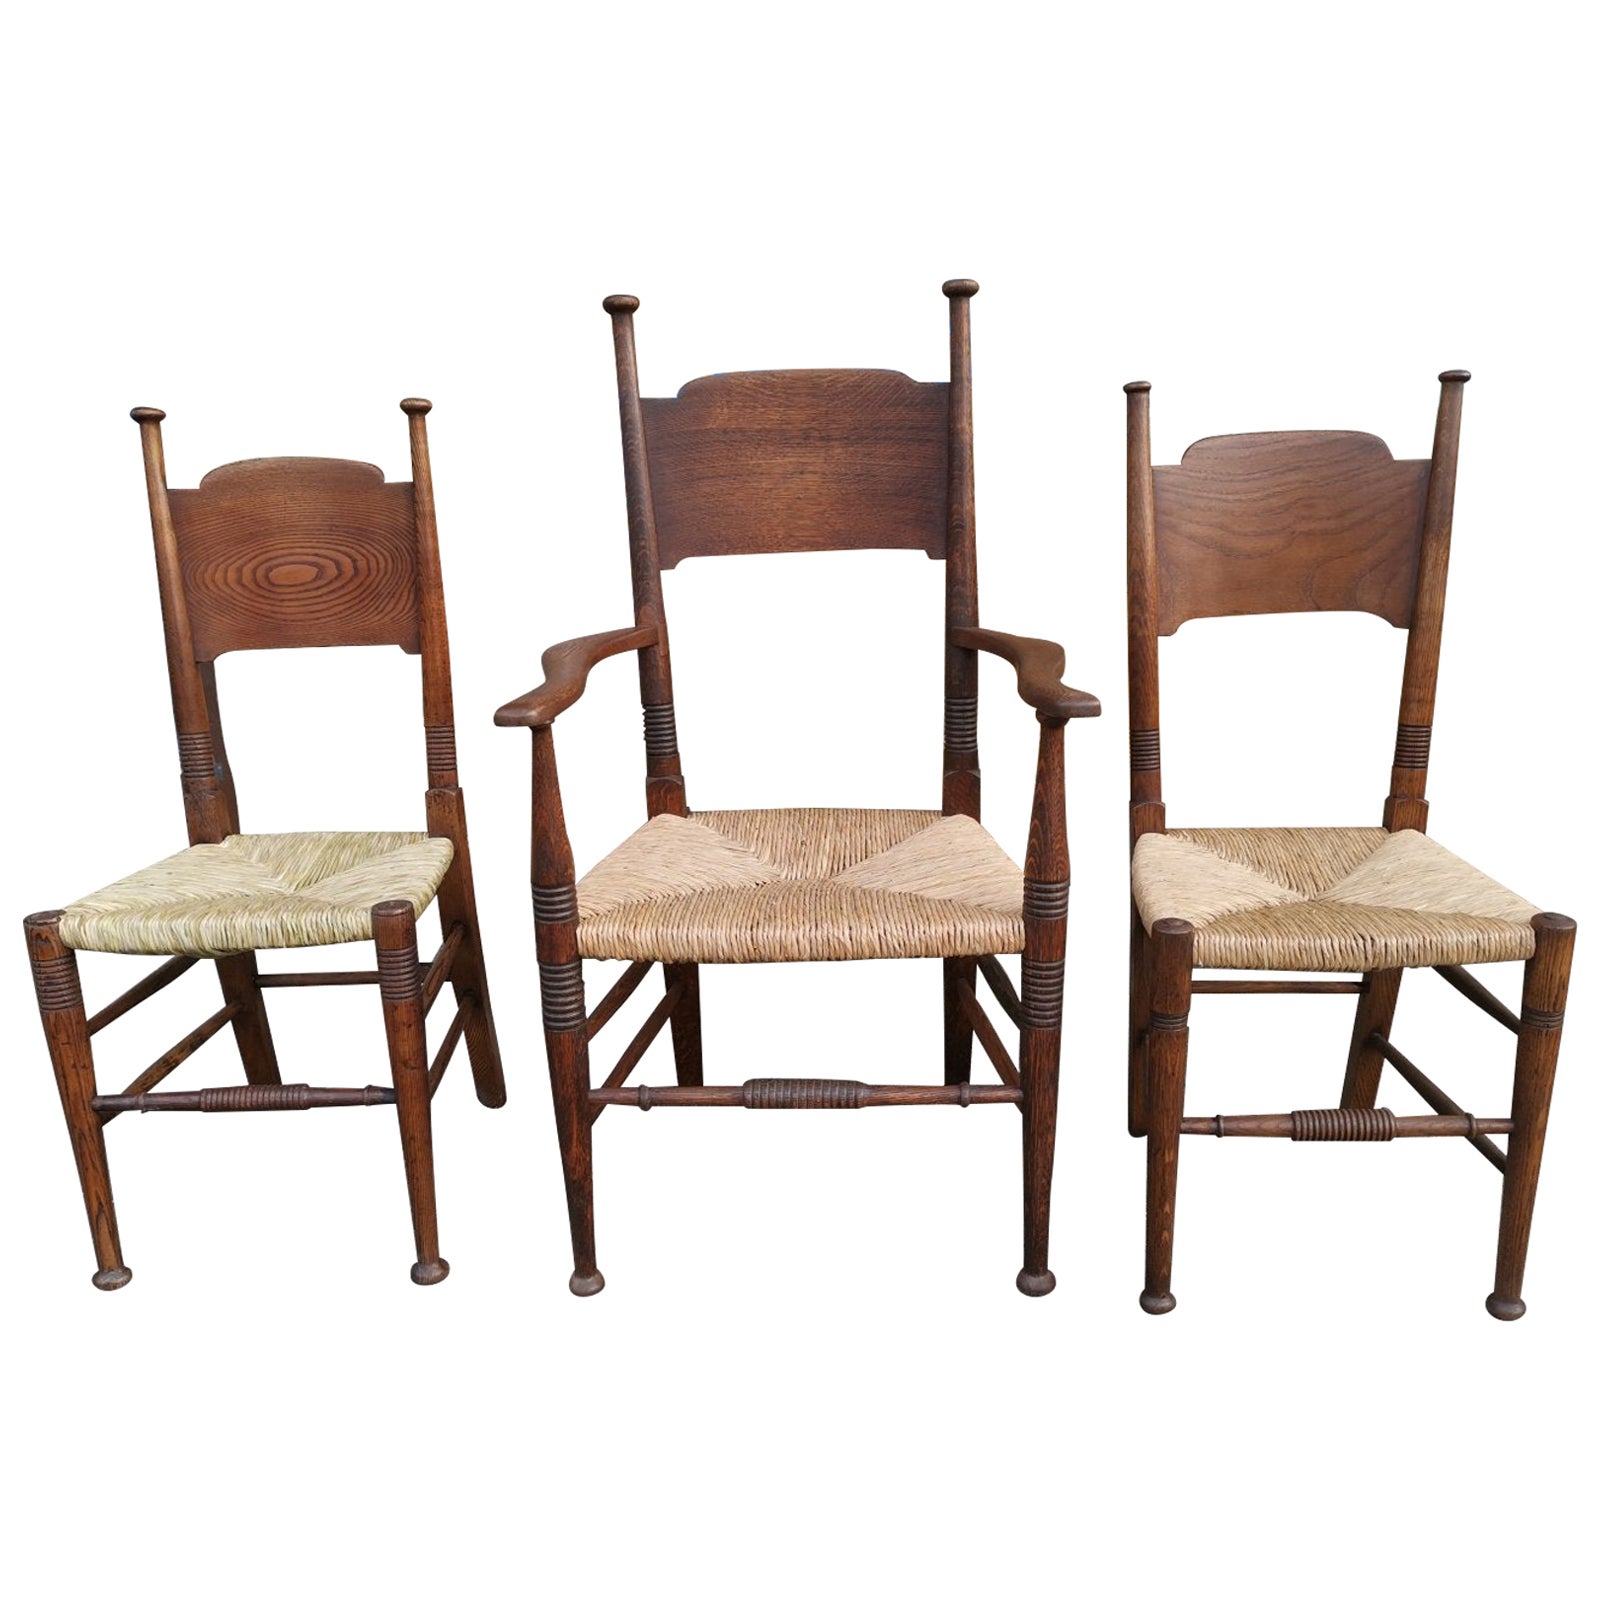 Liberty & Co, William Birch, Arts & Crafts Armchair & Two Differing Side Chairs For Sale